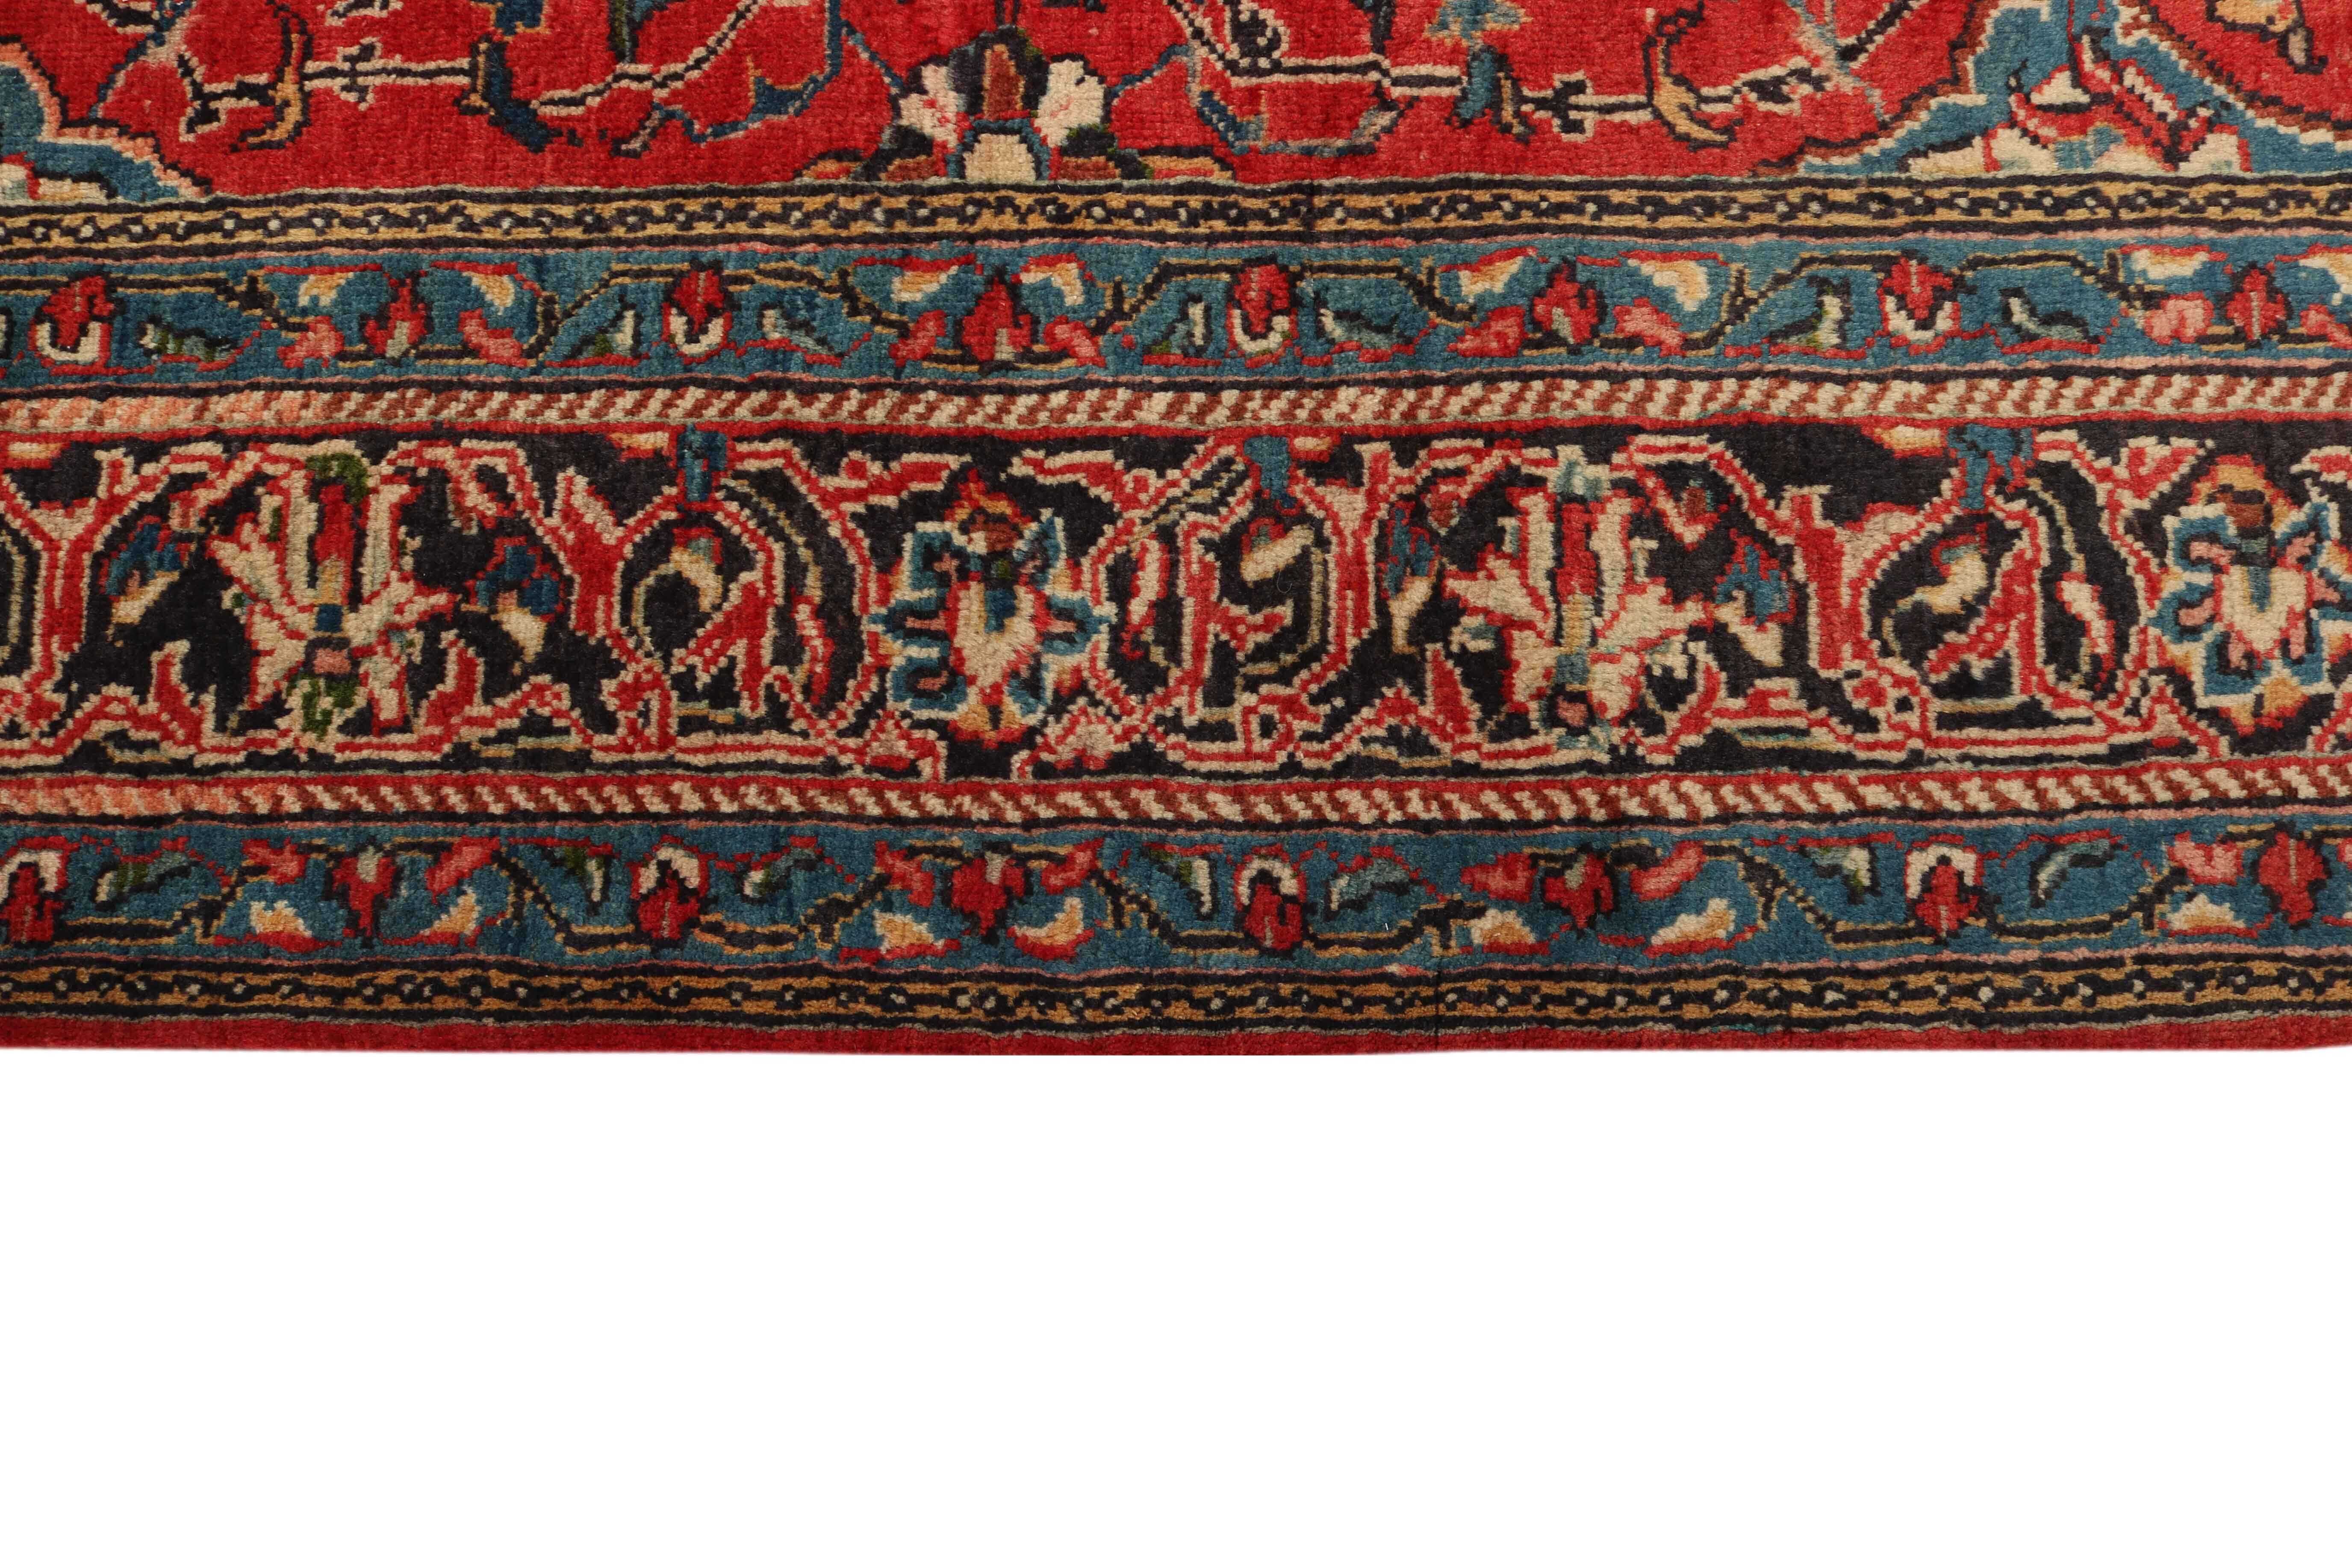 Large authentic persian rug with traditional floral pattern in red